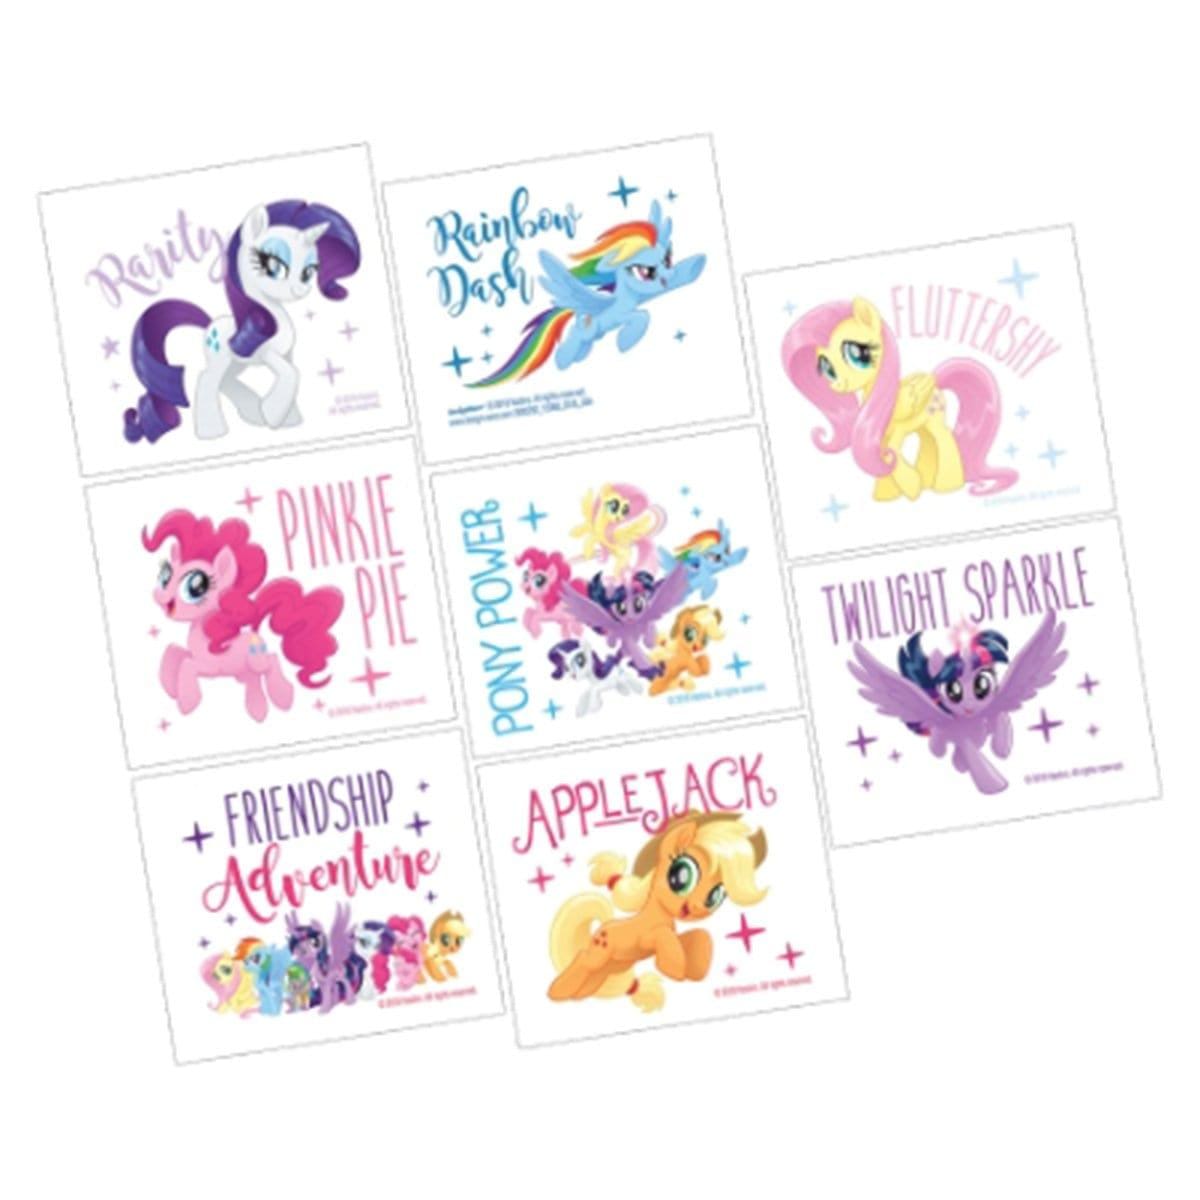 Buy Kids Birthday My Little Pony temporary tattoos, 8 per package sold at Party Expert